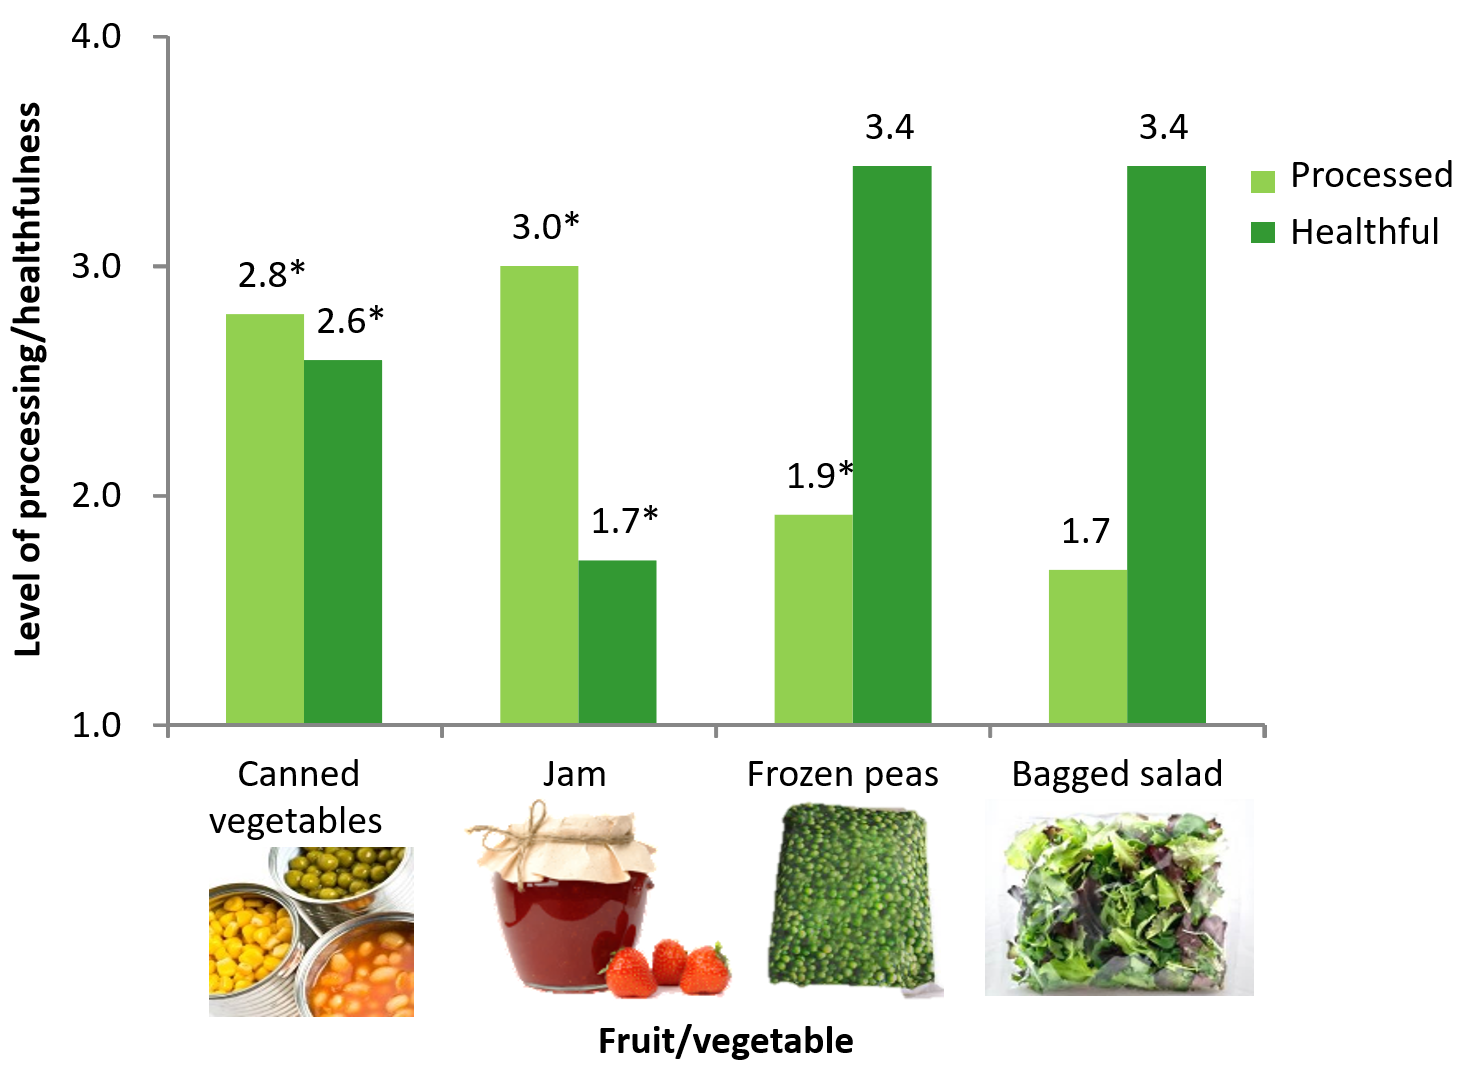 The second shows the level of processing/healthfulness on the y axis and four different fruit/vegetable products on the x axis (canned vegetables, jam, frozen peas, bagged salad). Bagged salad has the lowest processing score (1.7) and jam the highest (3.0). Jam has the lowest healthfulness score (1.7) and frozen peas and bagged salad have the equal highest (3.4). The other processing scores were canned vegetables (2.8) and frozen peas (1.9). The other healthfulness score was canned vegetables (2.6)